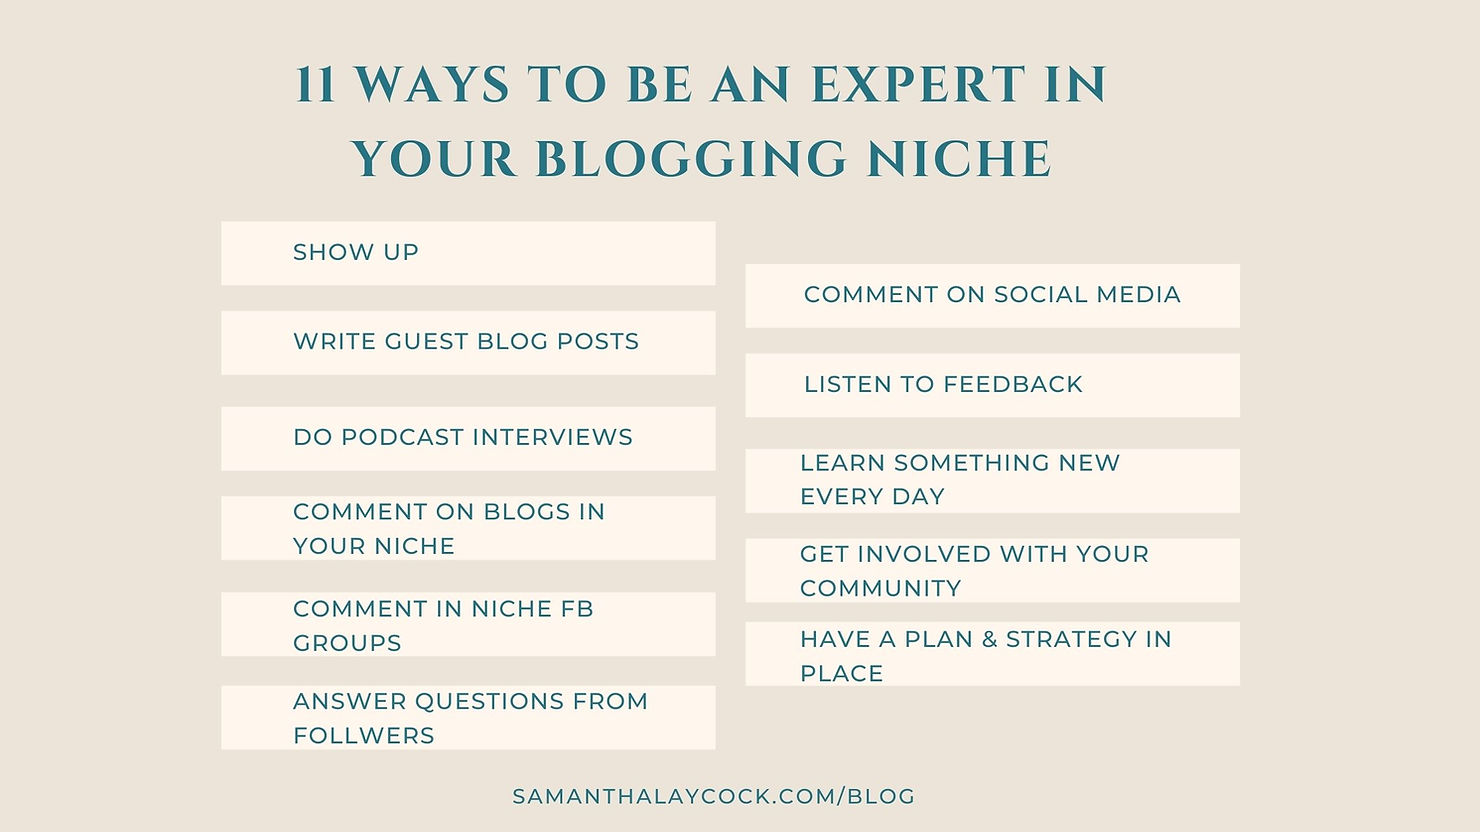 11 ways to be seen as an expert in your blogging niche